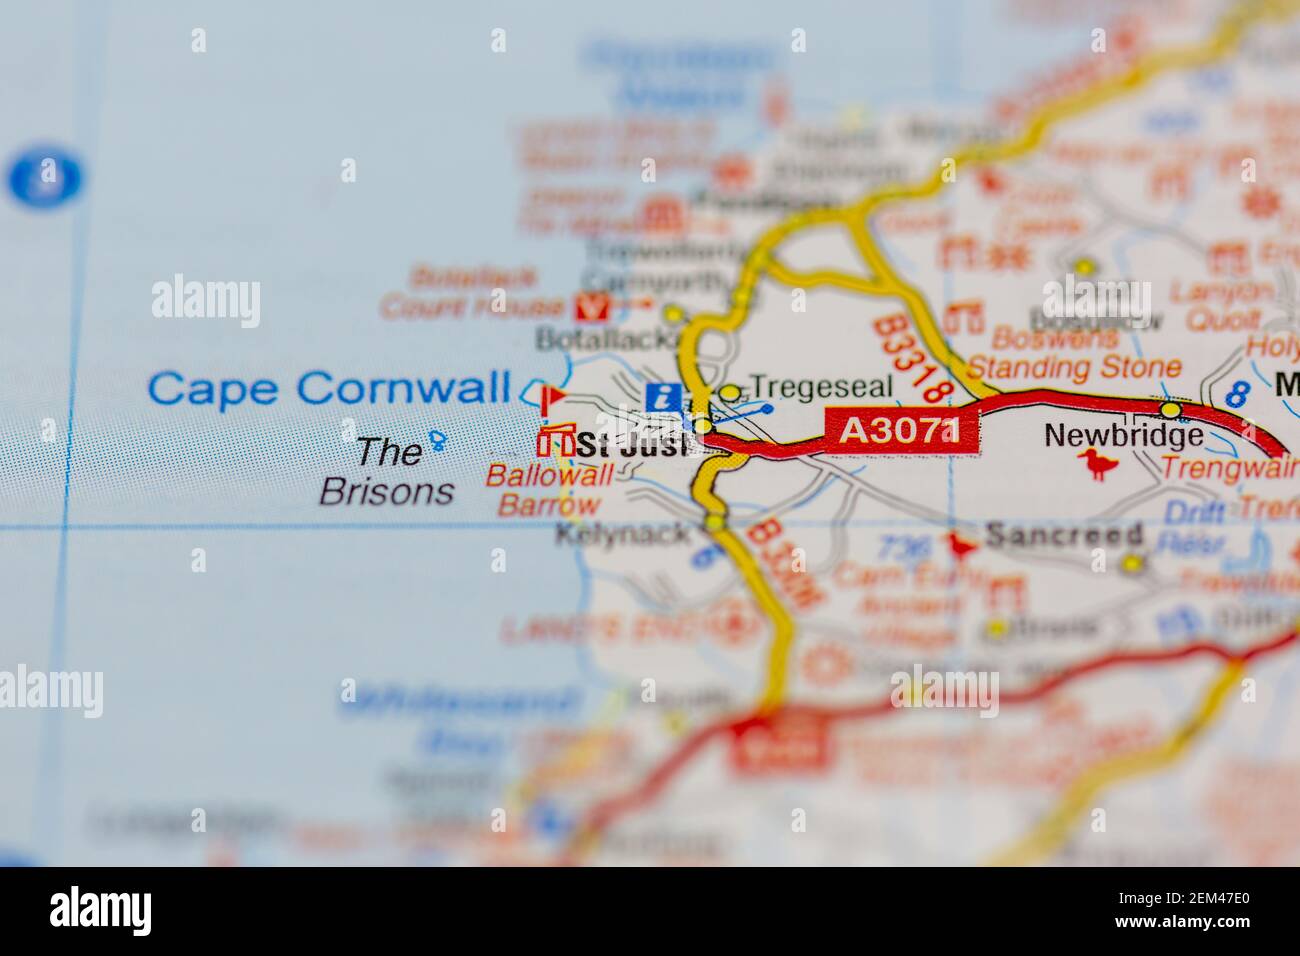 St Just in cornwall shown on a road map or geography map Stock Photo